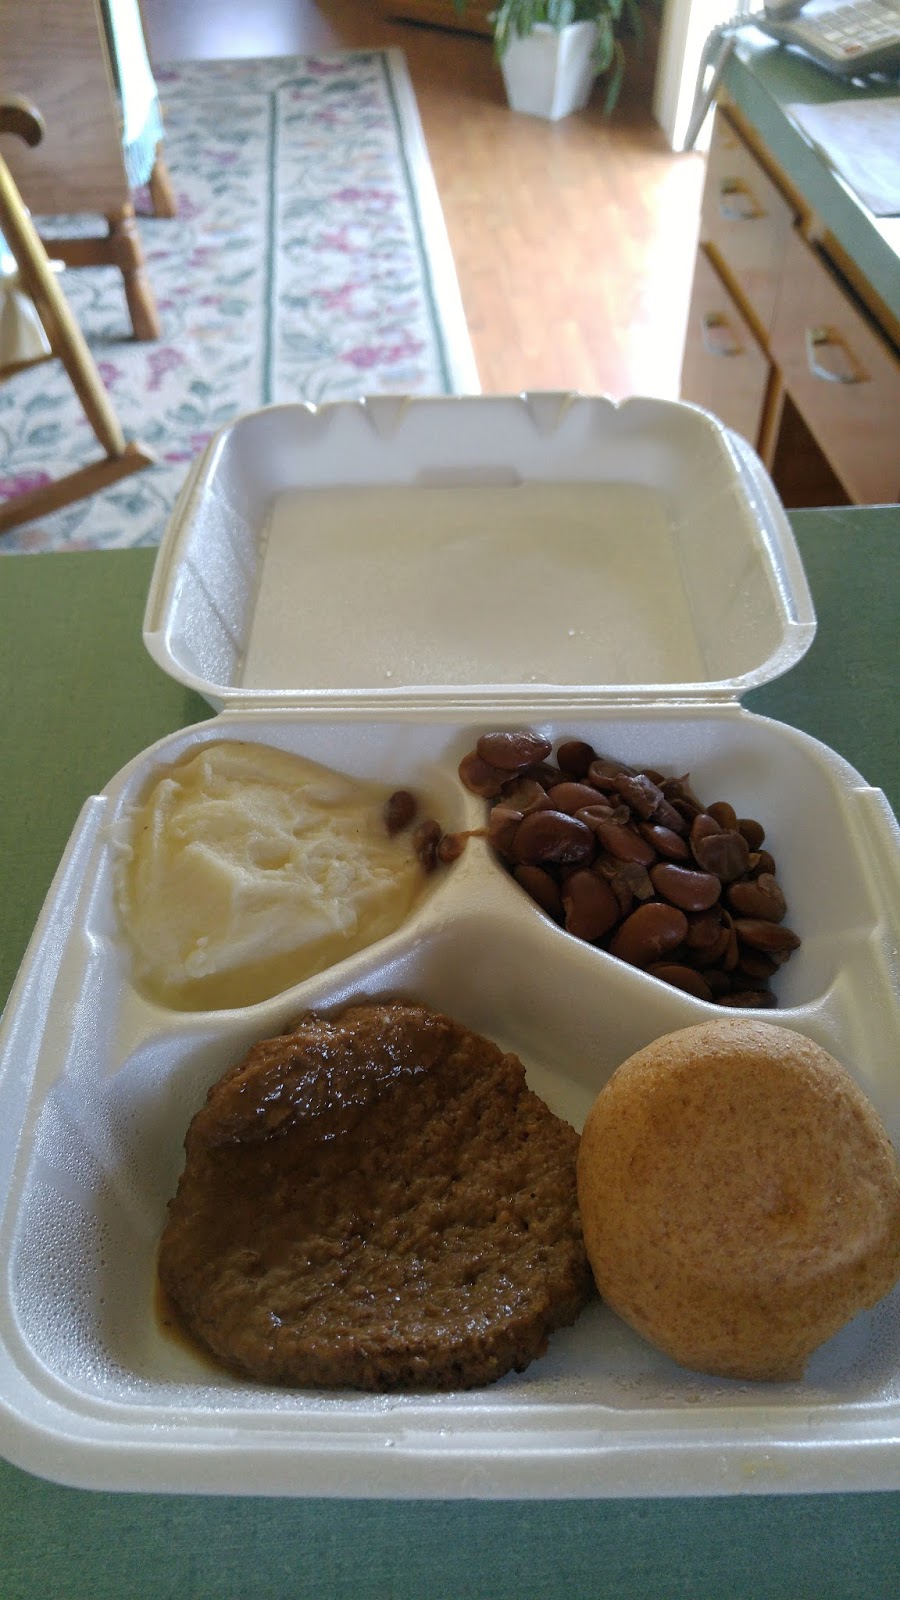 The Good The Bad & The Ugly Living With Dementia: MEALS ON WHEELS